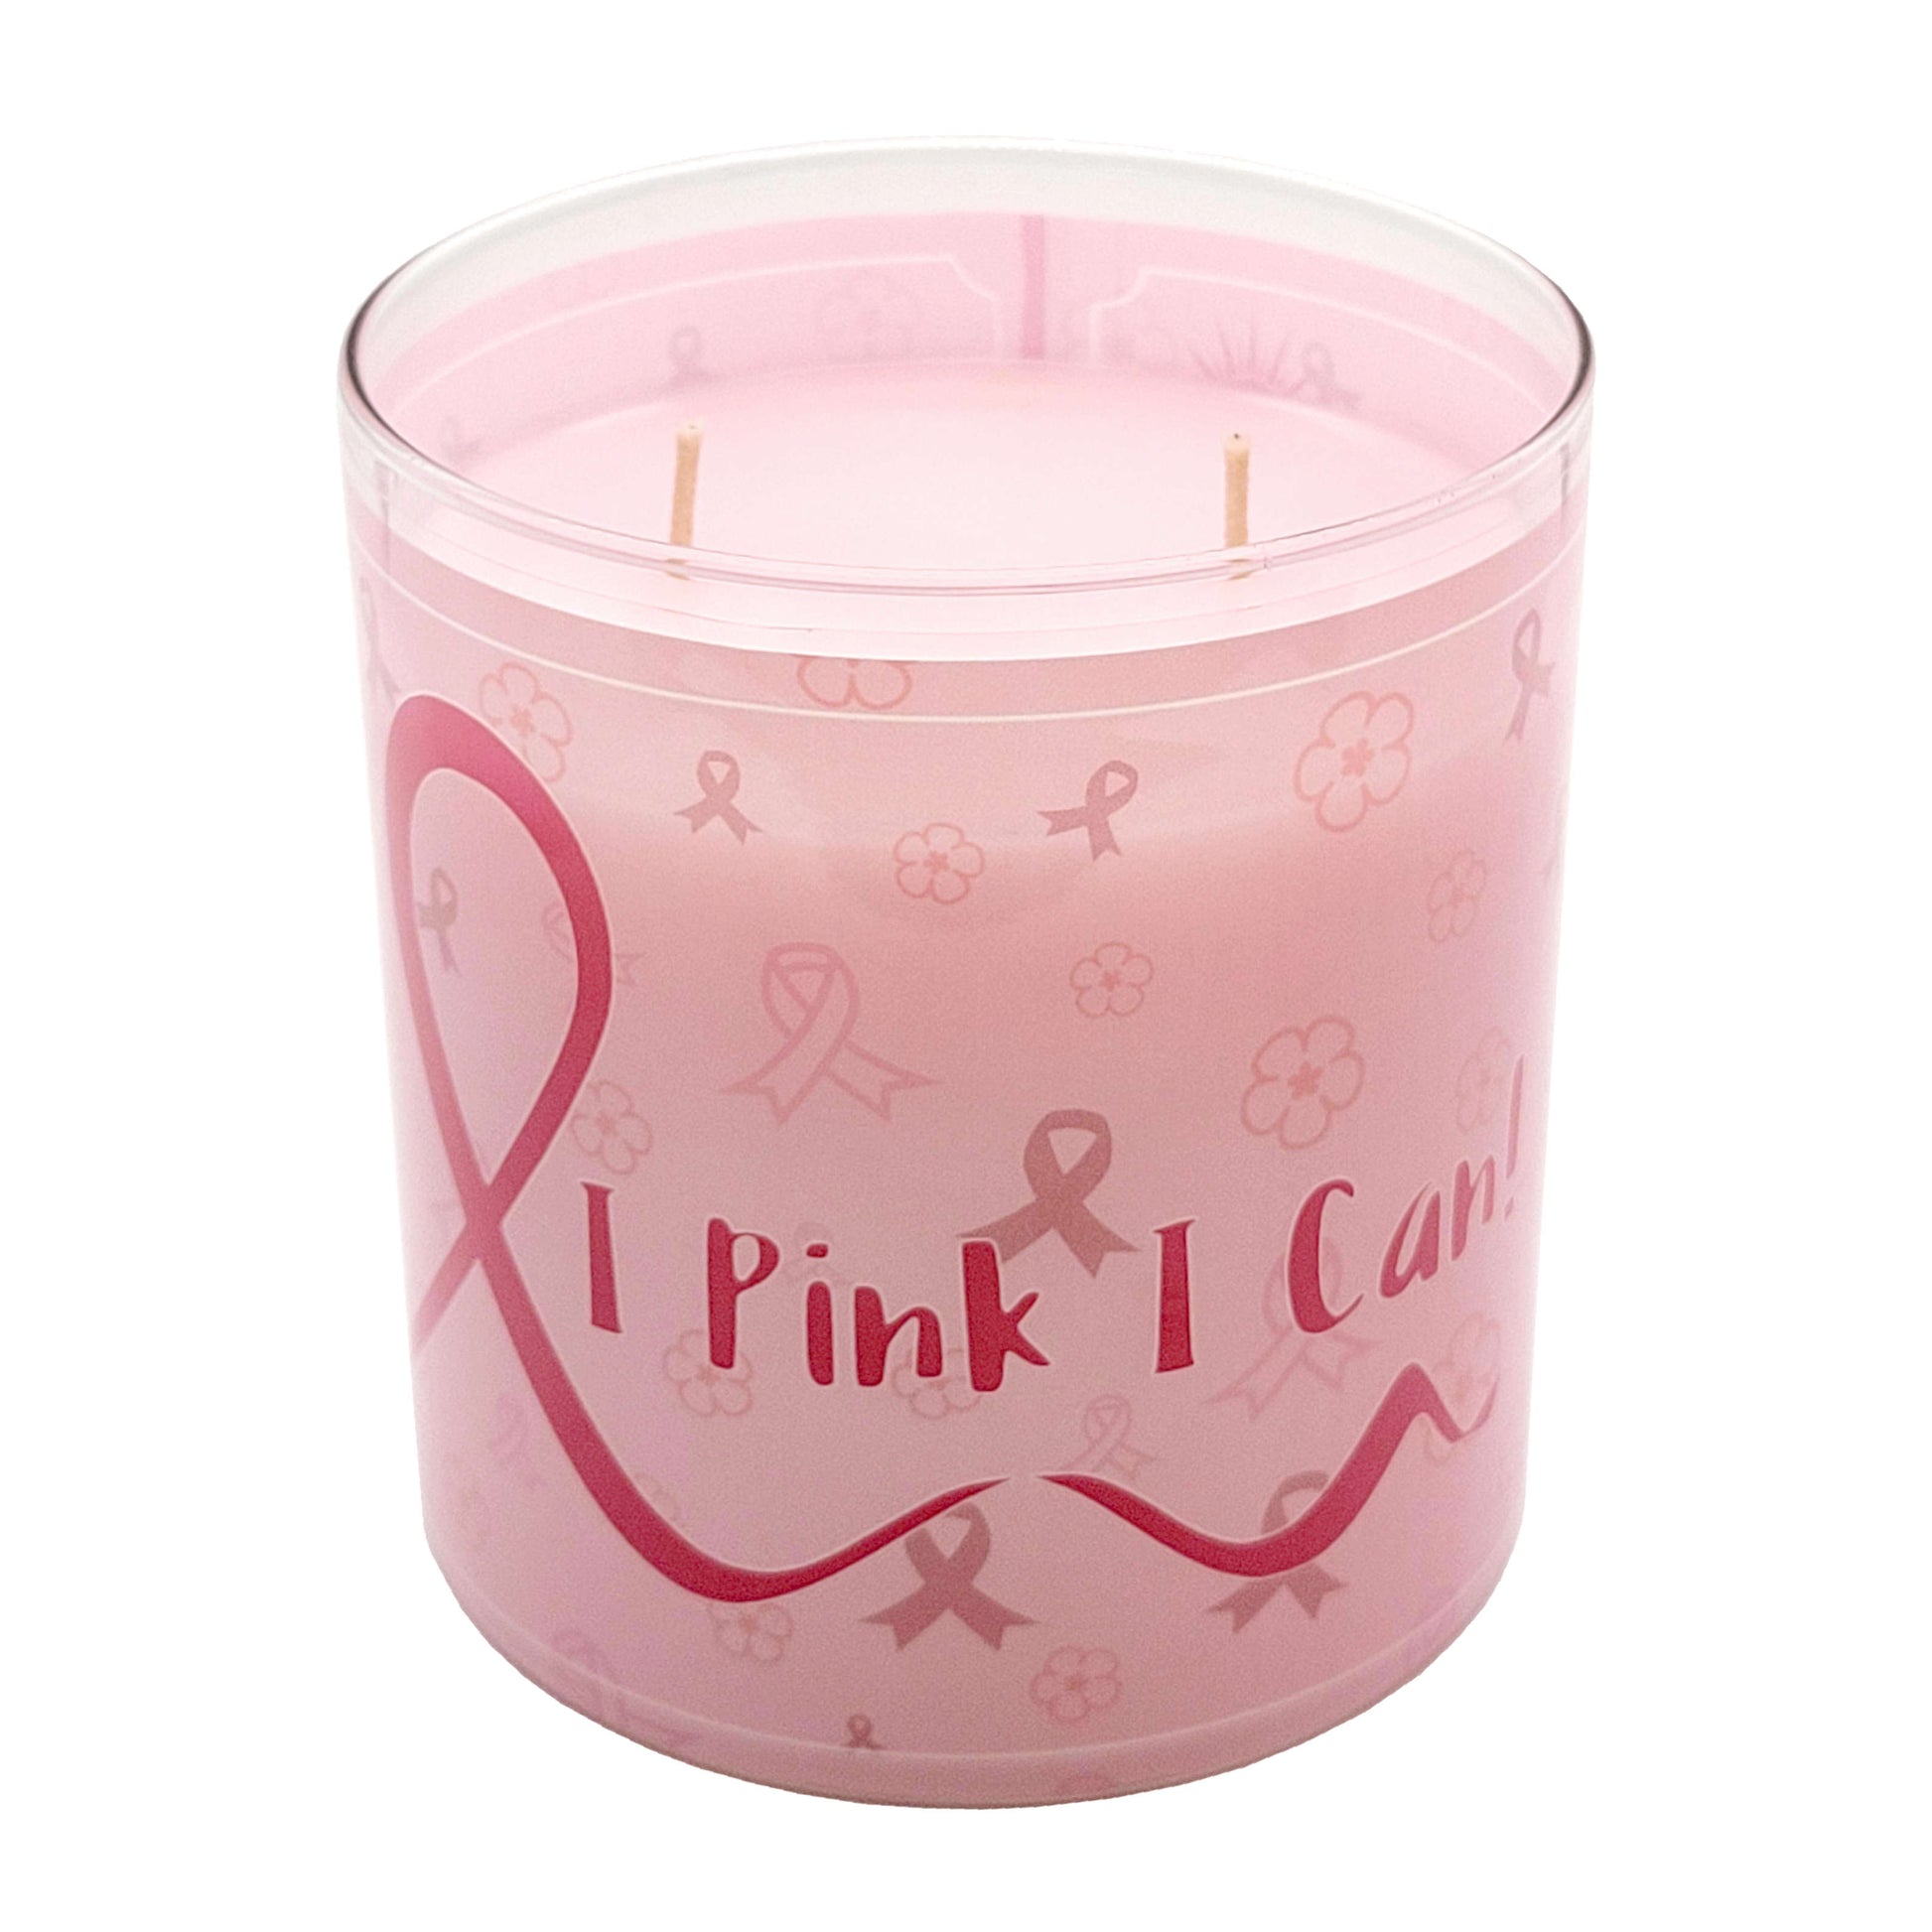 Cashmere - I PINK I CAN - Scented Candle.